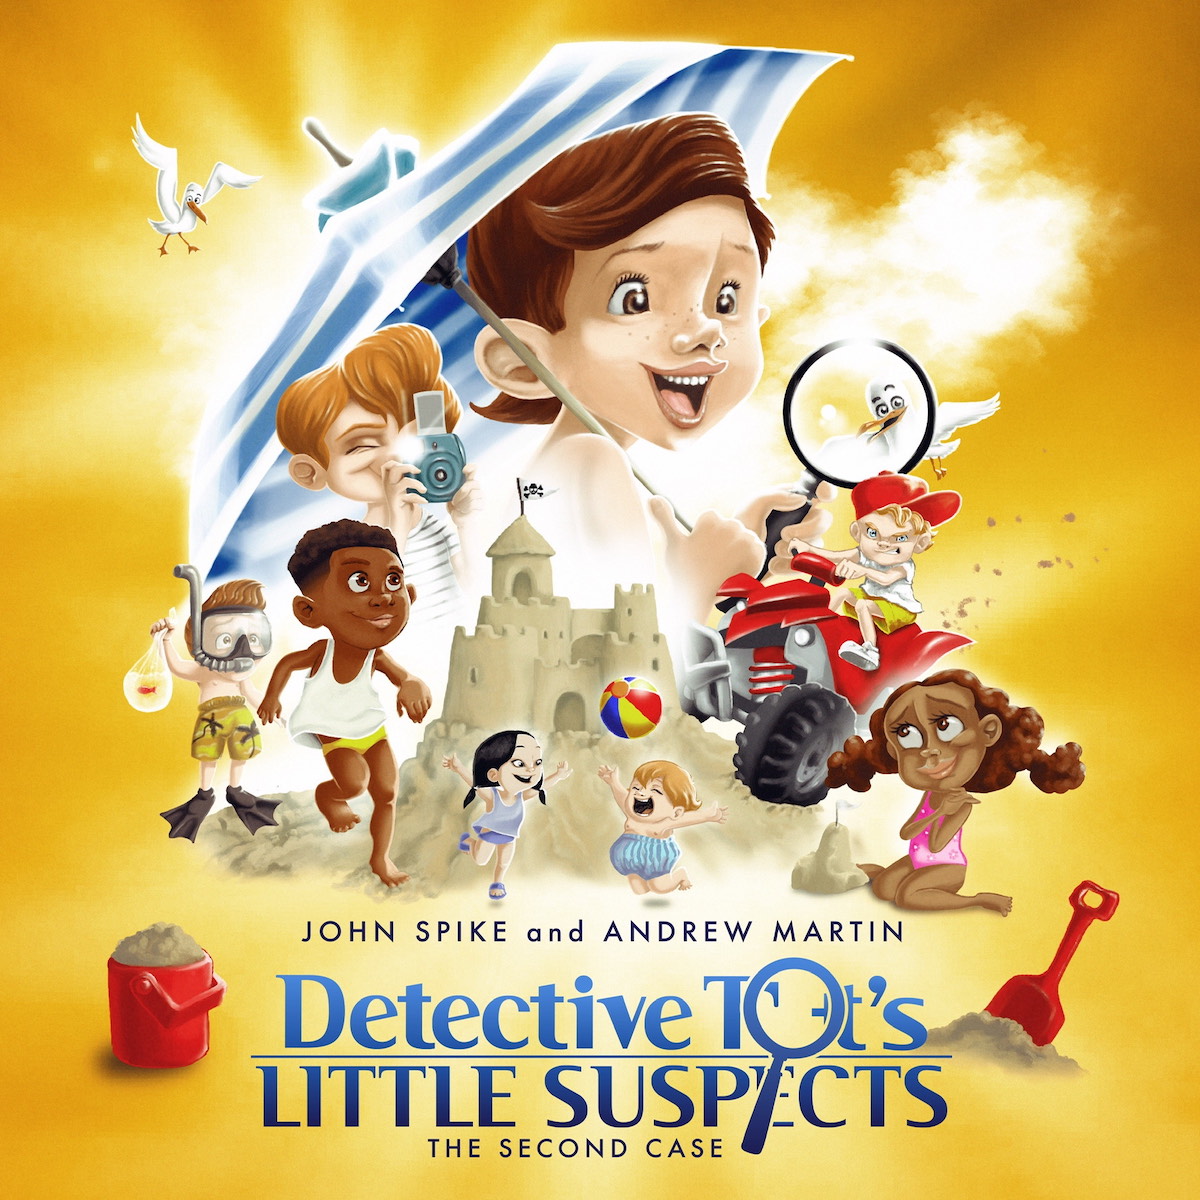 Detective Tot's Little Suspects: The Second Case - John Spike and Andrew Martin (2021)